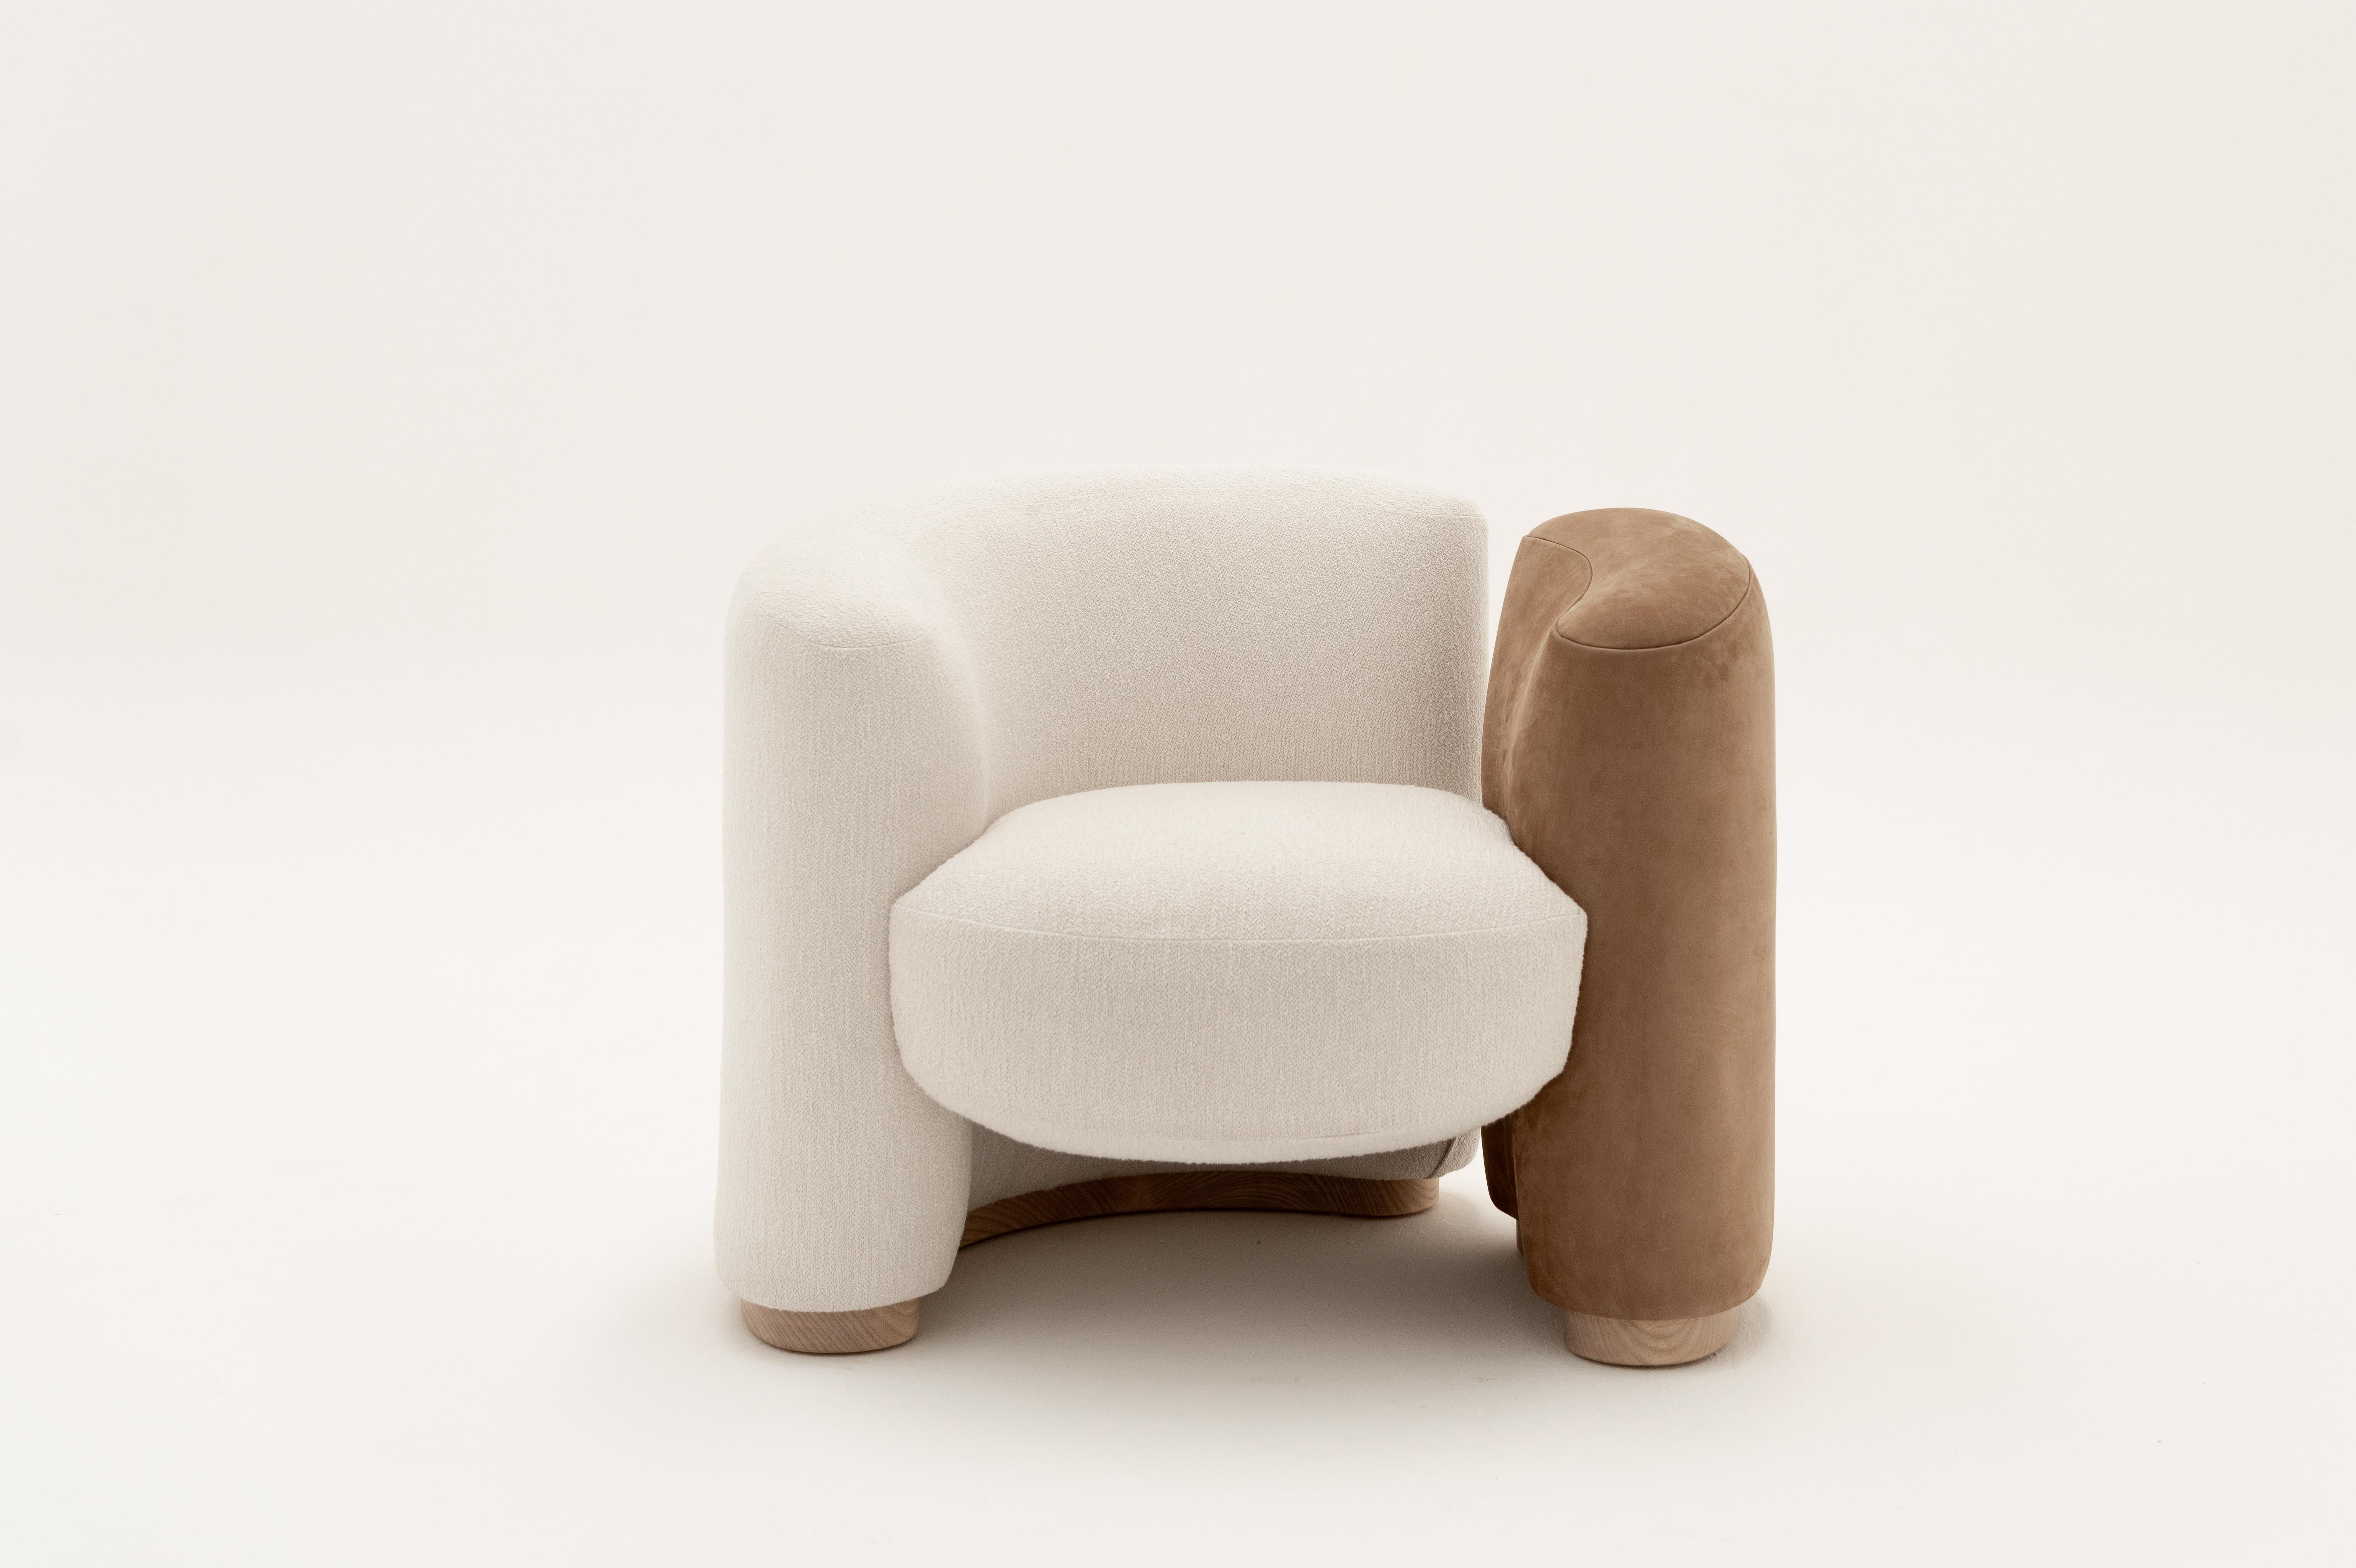 A conversational armchair built by a unique assembly process of three separate elements, with a subtle visual effect intended to create a classic, but infinitely bold piece. Ad Hoc got inspired by the elegance and silhouette of the famous Mexican